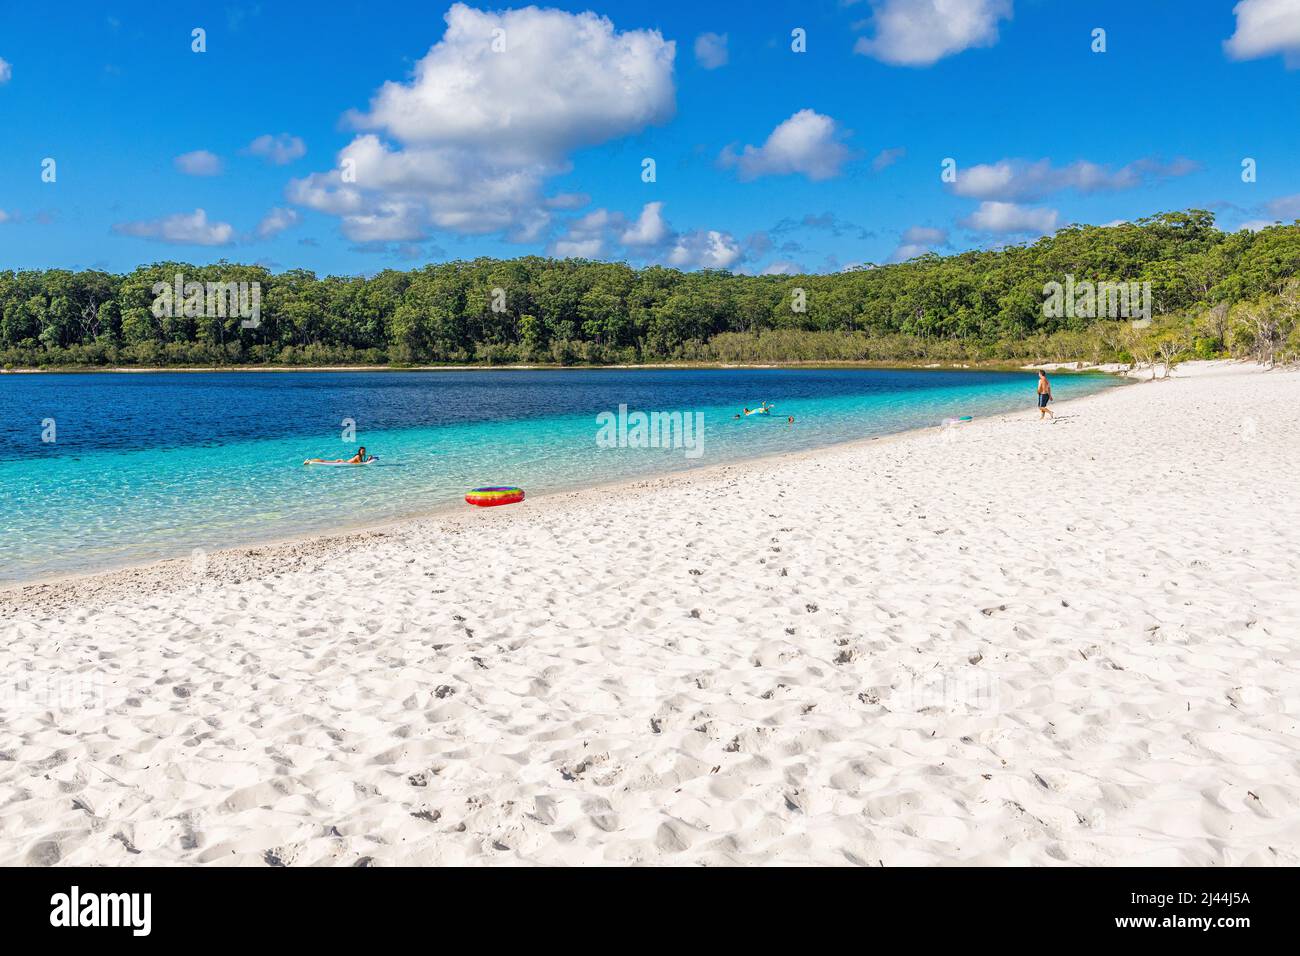 Tourists swim in the crystal clear water at Lake McKenzie on Fraser Island in Queensland, Australia Stock Photo